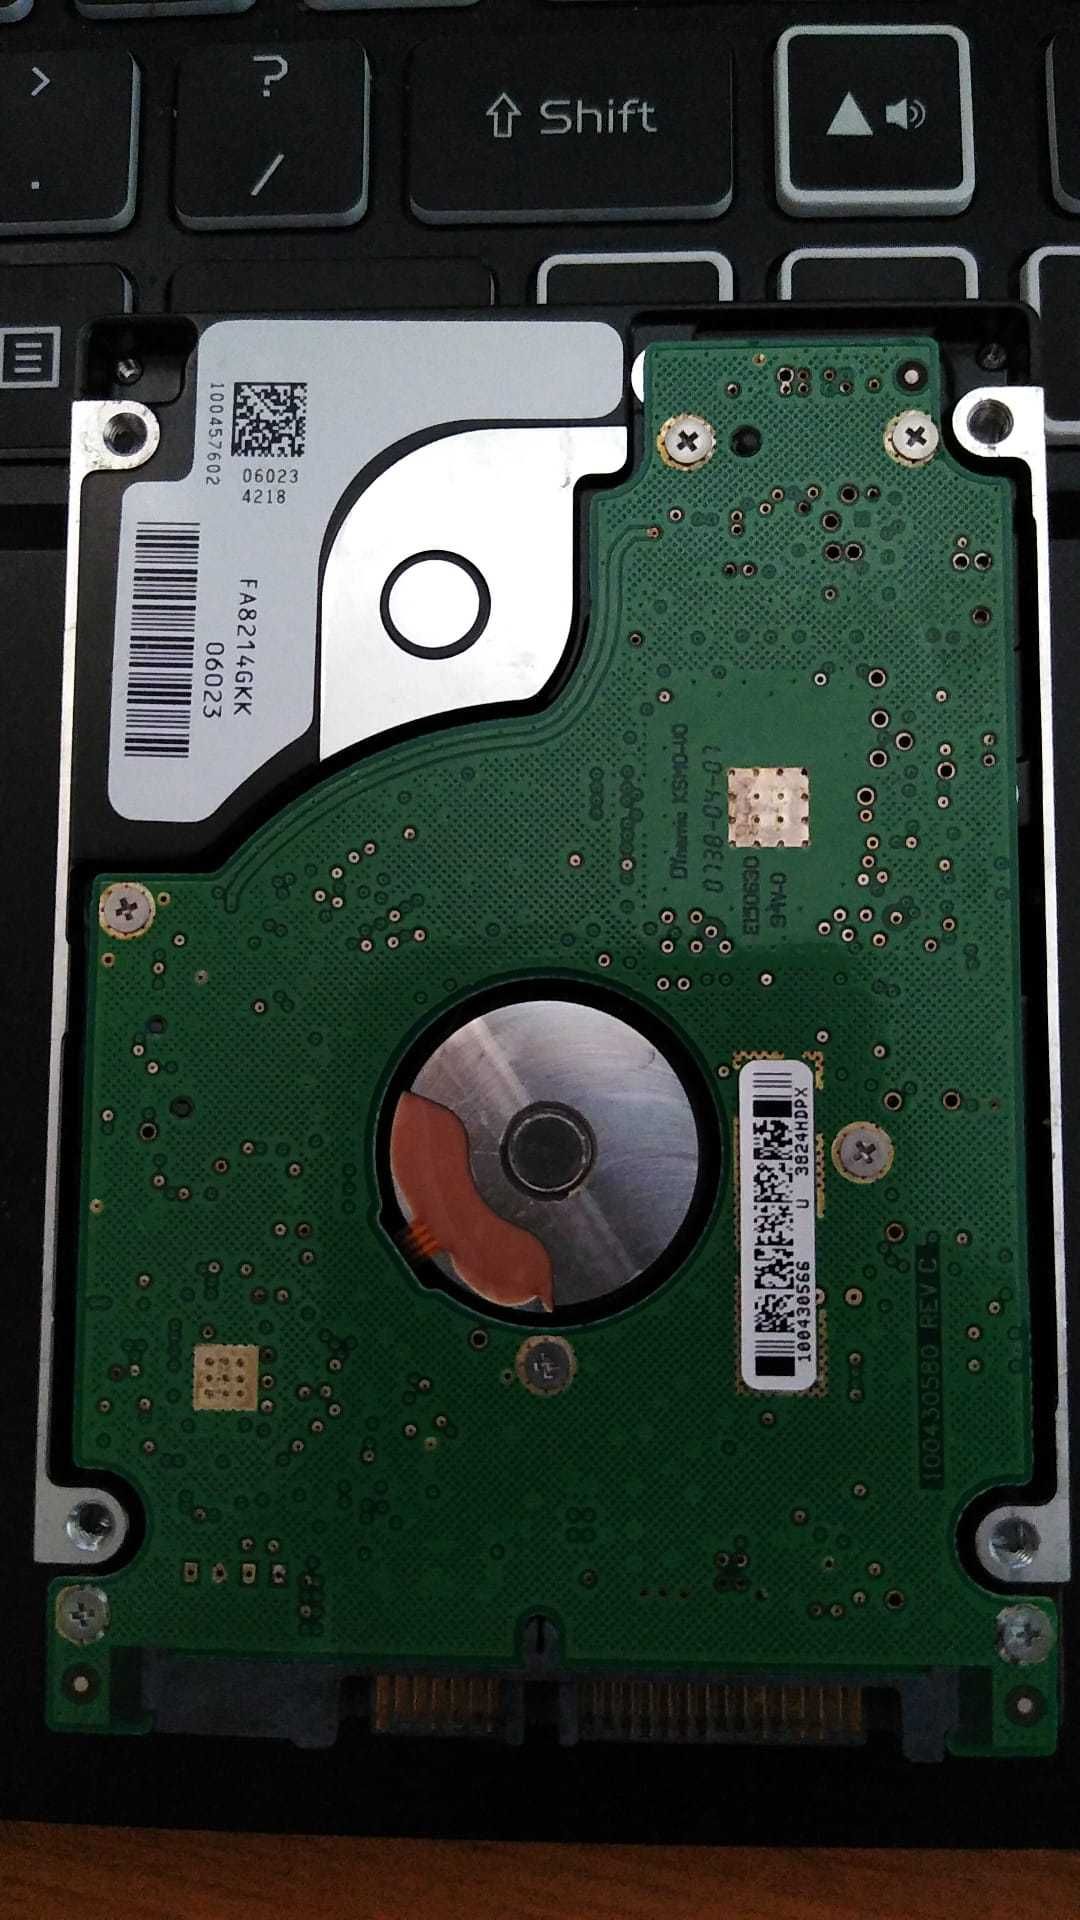 Vand hdd laptop seagate momentus 7200 rpm, 200Gb